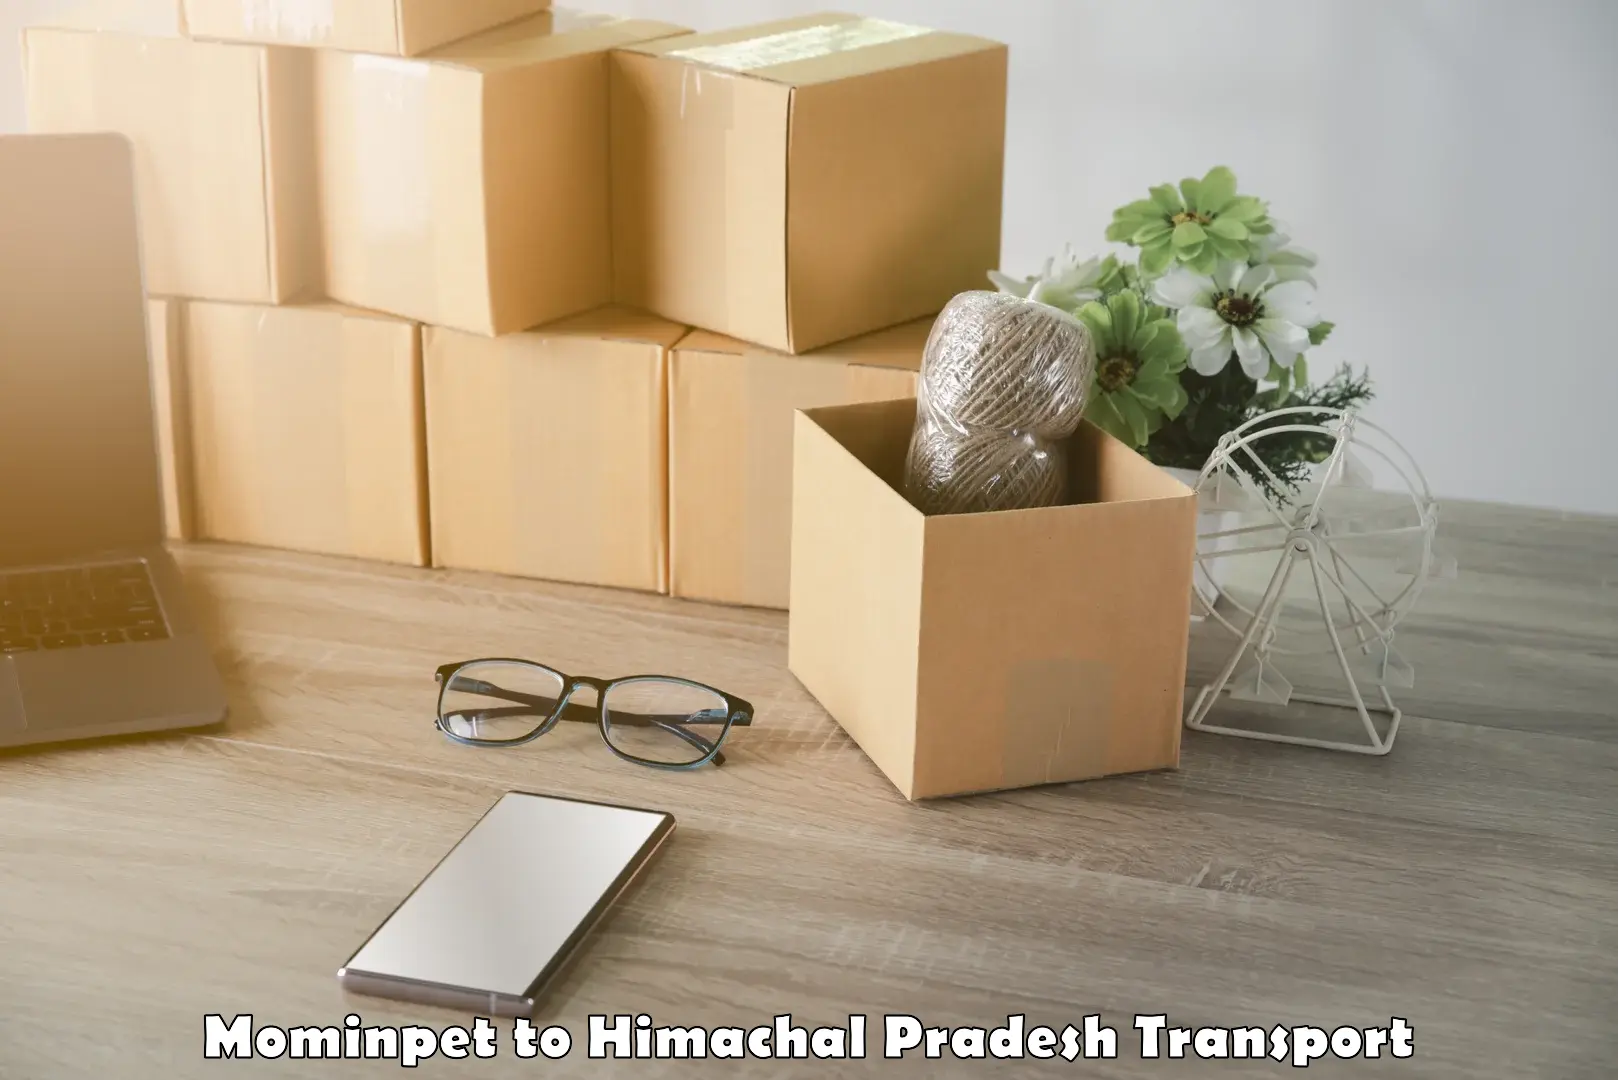 Truck transport companies in India Mominpet to Kotkhai